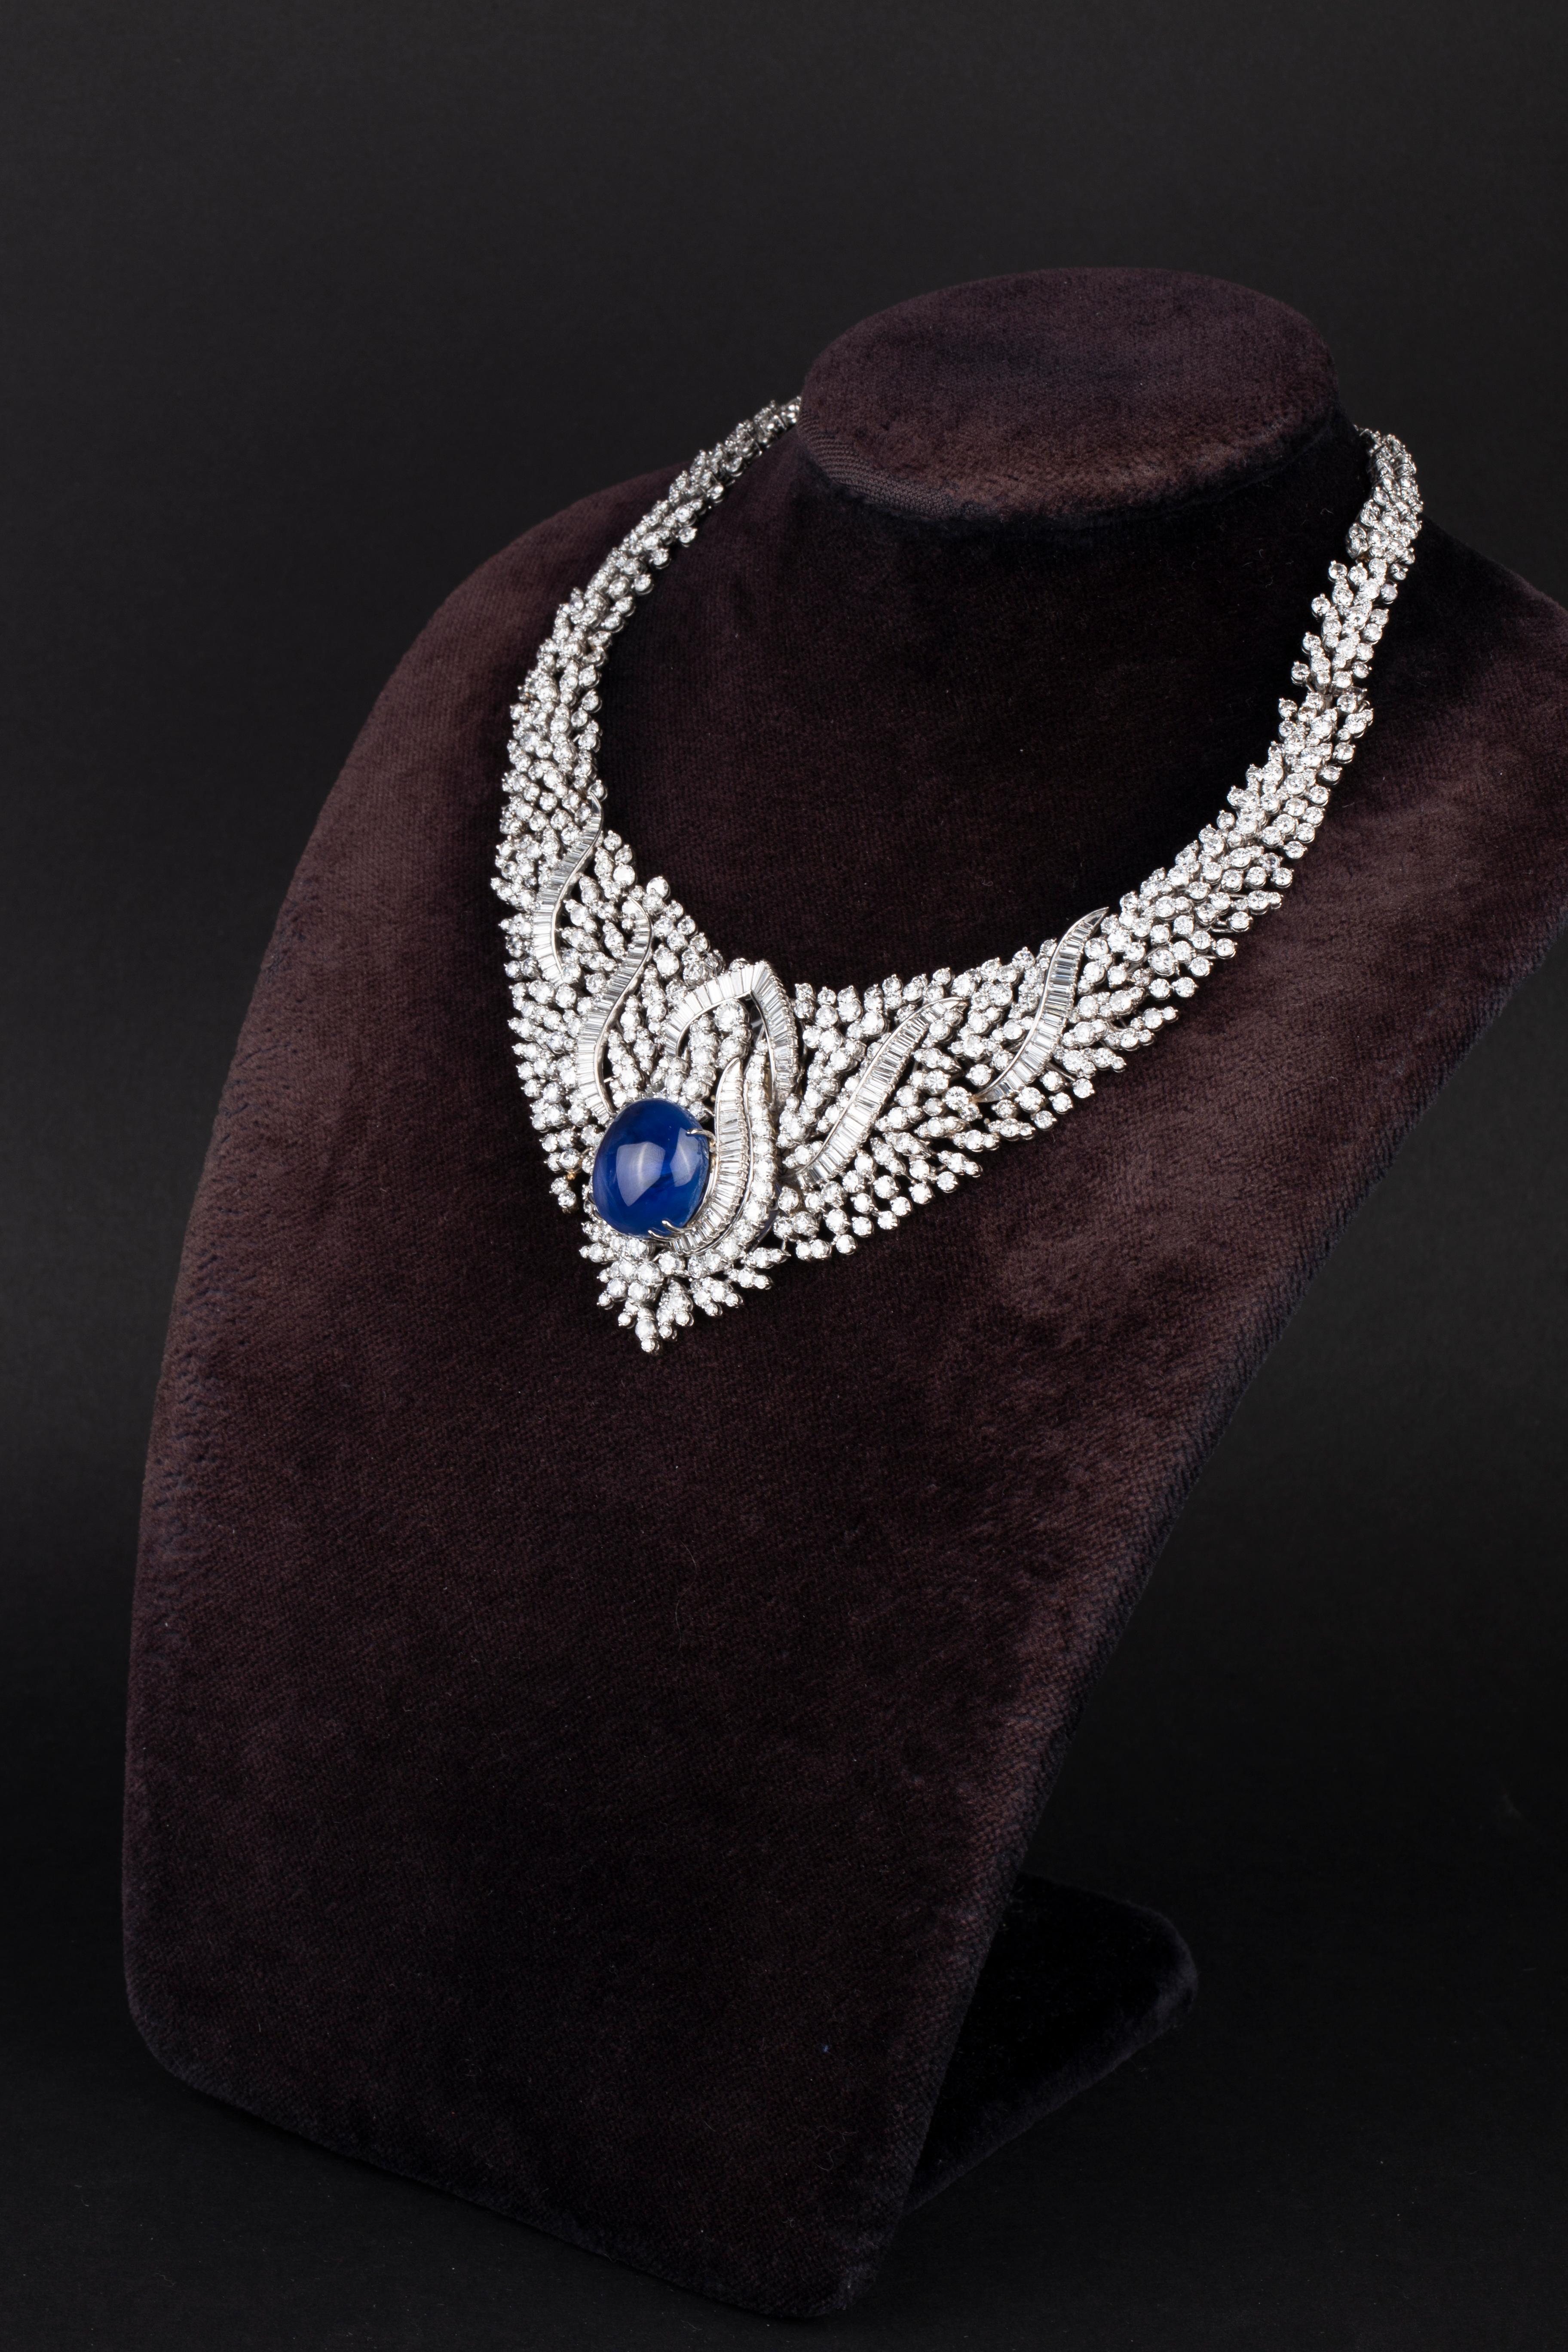 Mixed Cut Important Retro Diamond Statement Necklace with 39 Carat Cabochon Sapphire For Sale